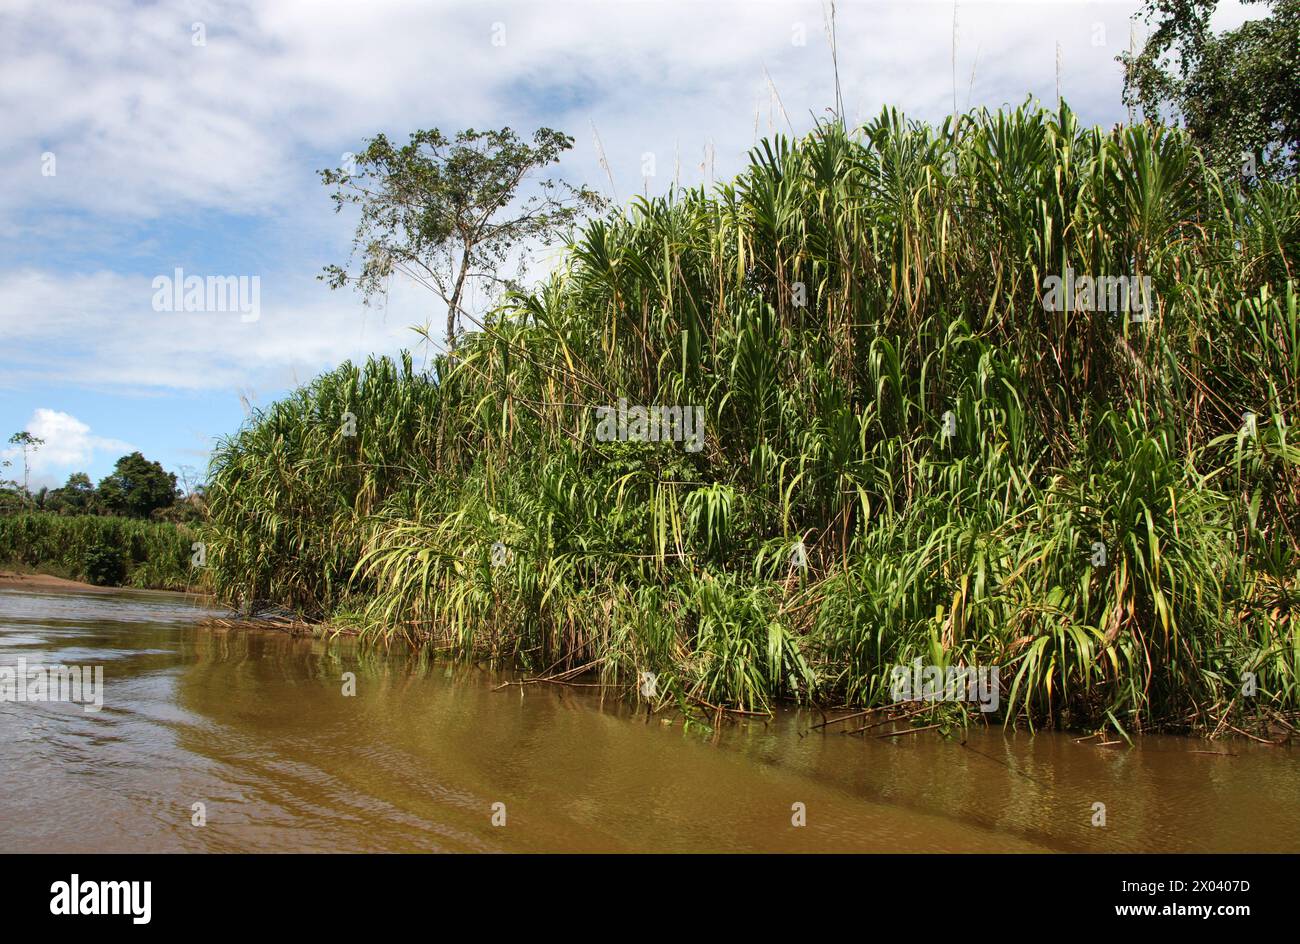 Wild Cane or Wildcane, Gynerium sagittatum, Gynerieae. Growing on the riverside en-route from Cano Blanco to Tortuguero, Costa Rica, Central America. Stock Photo